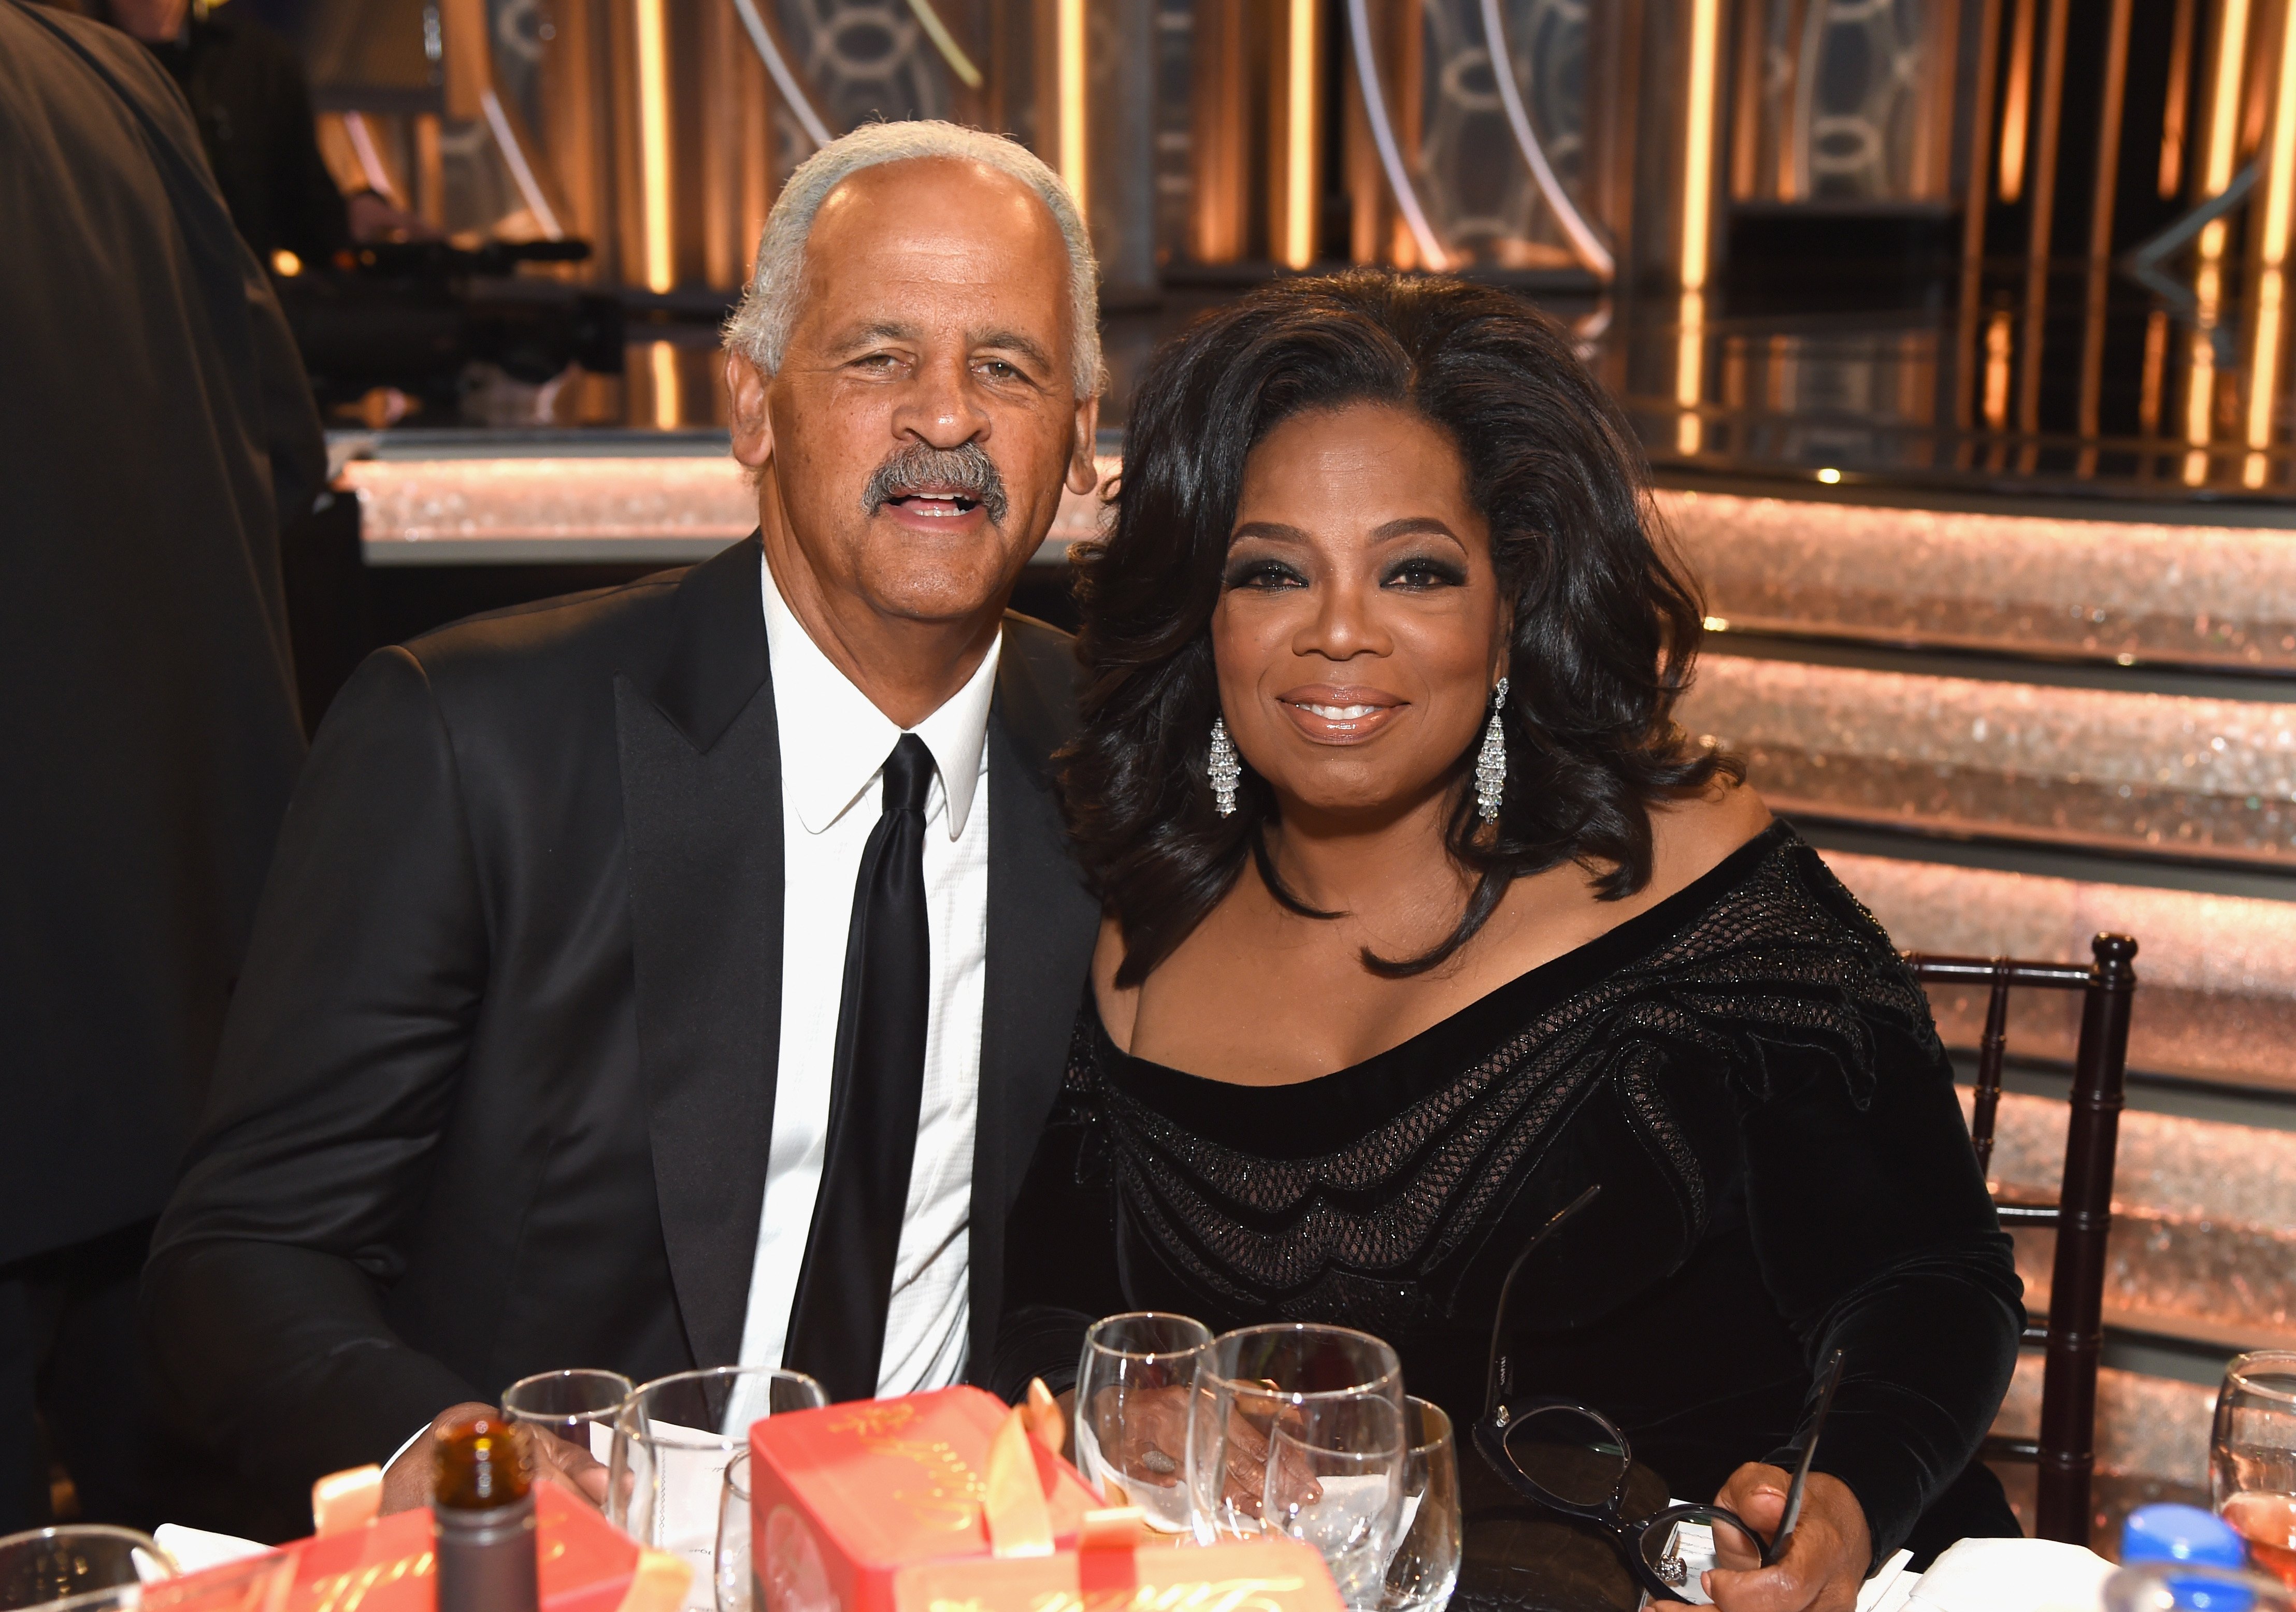 Stedman Graham (L) and Oprah Winfrey celebrate The 75th Annual Golden Globe Awards with Moet & Chandon at The Beverly Hilton Hotel on January 7, 2018 | Source: Getty Images